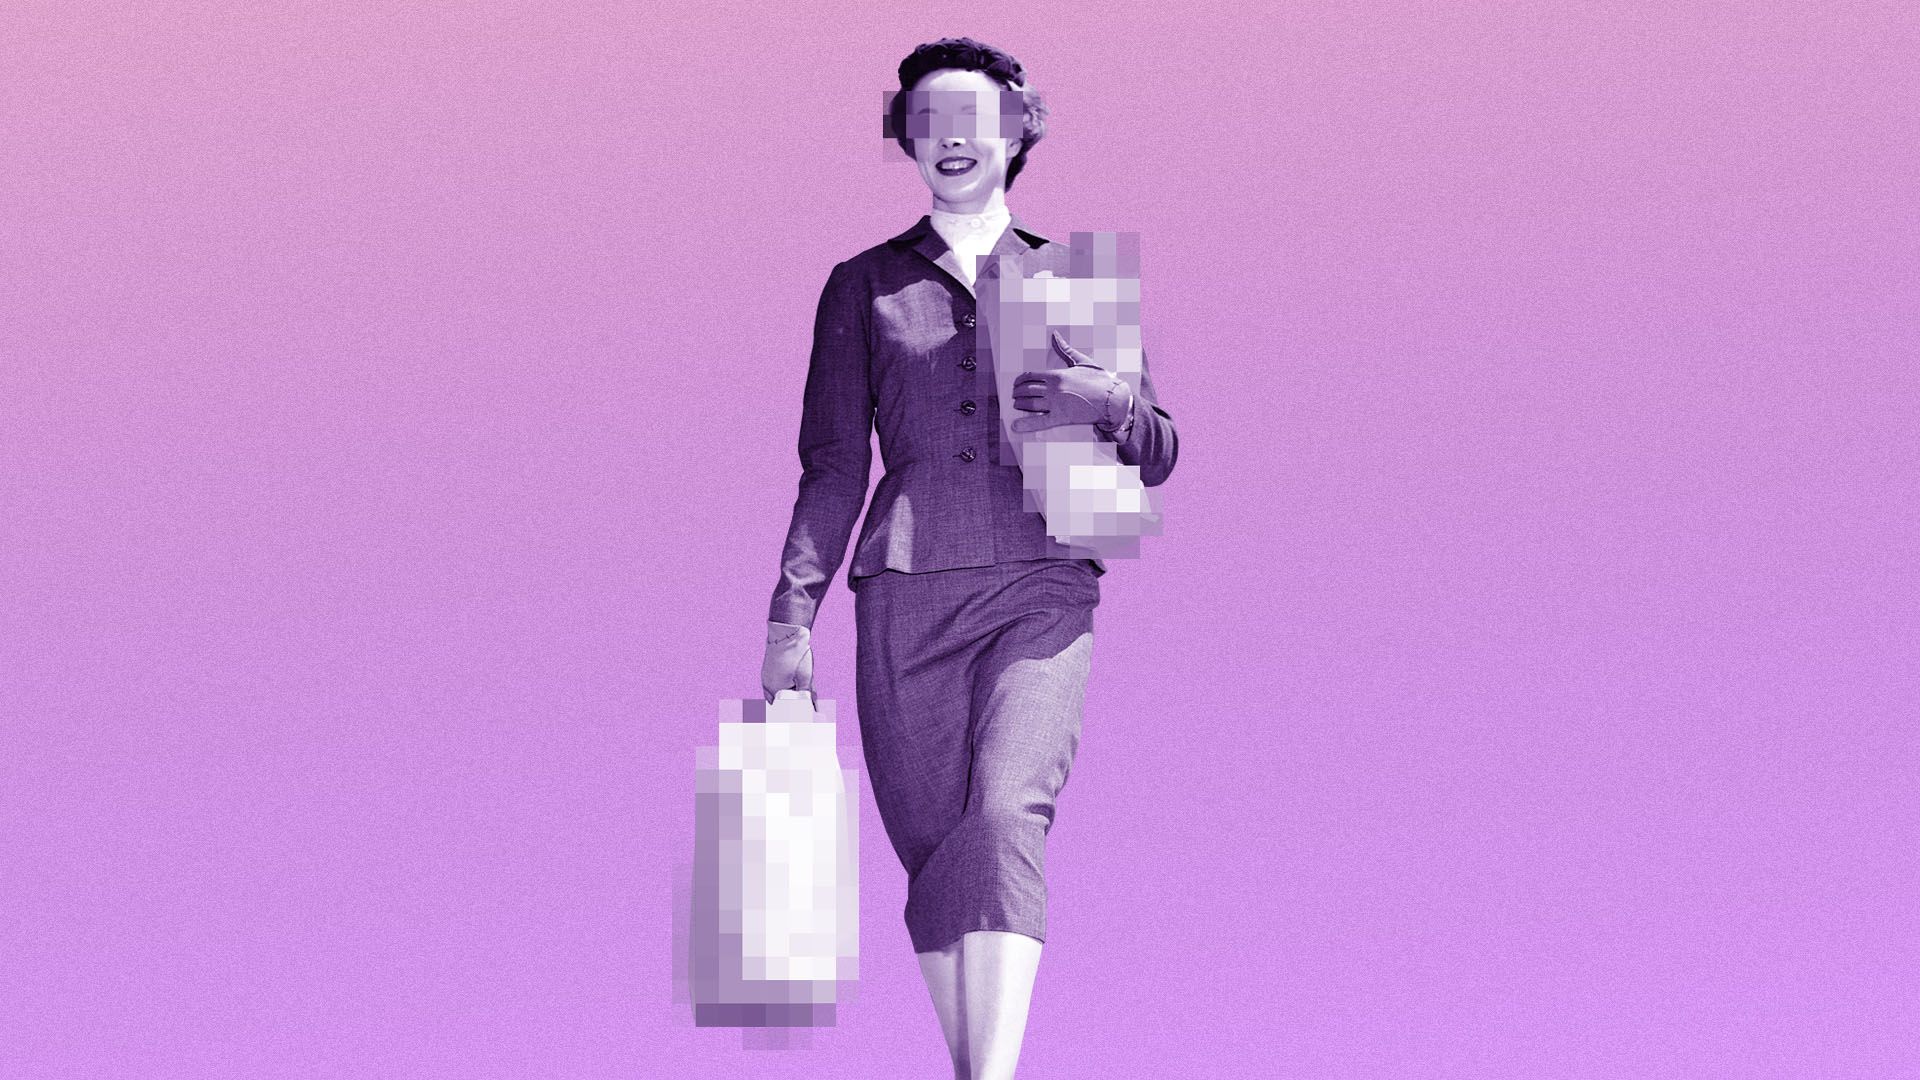 Illustration of a woman with pixelated eyes in vintage style holding pixelated shopping bags